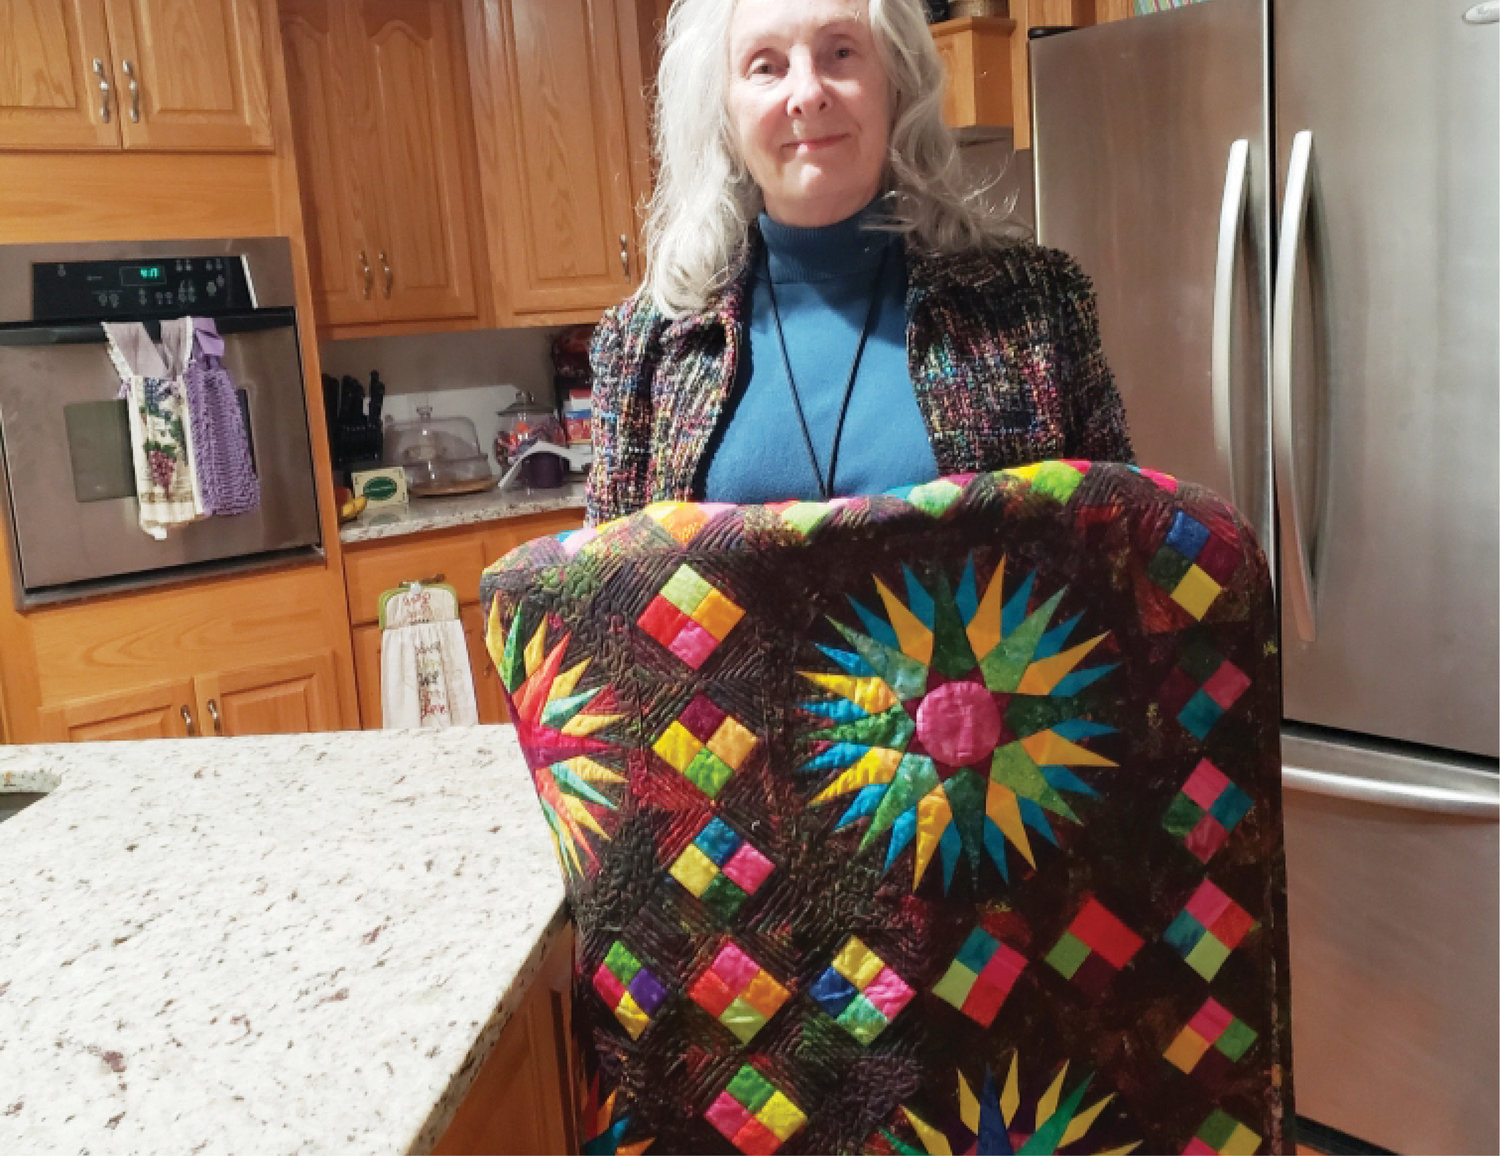 Sparta Woman’s Club recently held a craft and vendor show, at White County Agriculture Complex. Funds raised are divided among the club’s various projects and charities. One of the door prize winners was Nancy Downs, who received a quilt wall hanging. The next craft and vendor show will be May 14, 2022.